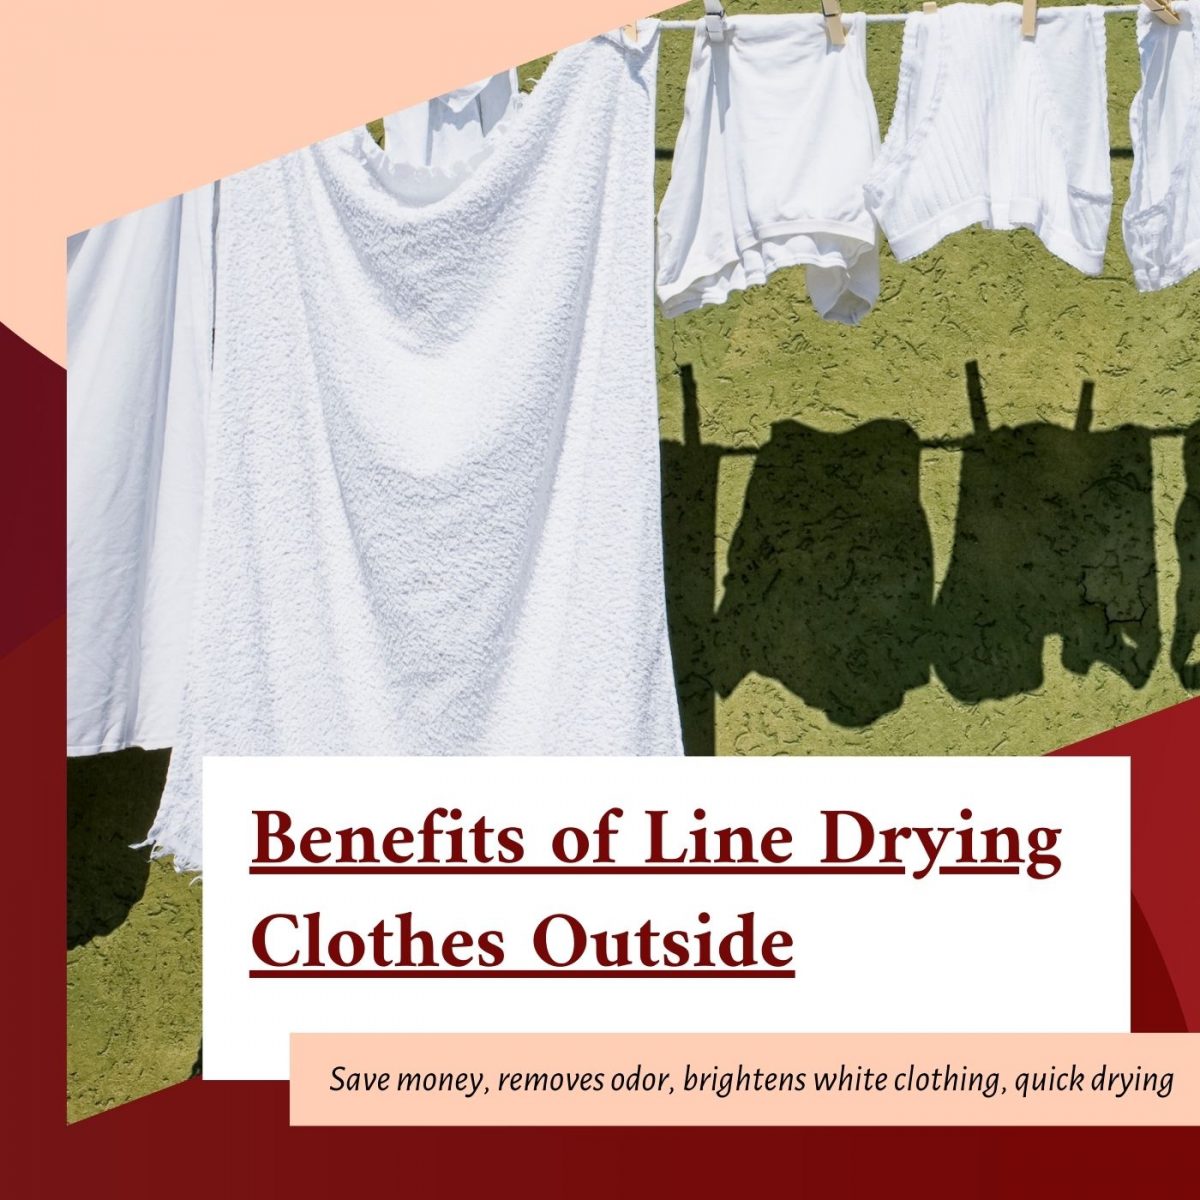 8 Tips to Save Money by Drying Clothes Outside